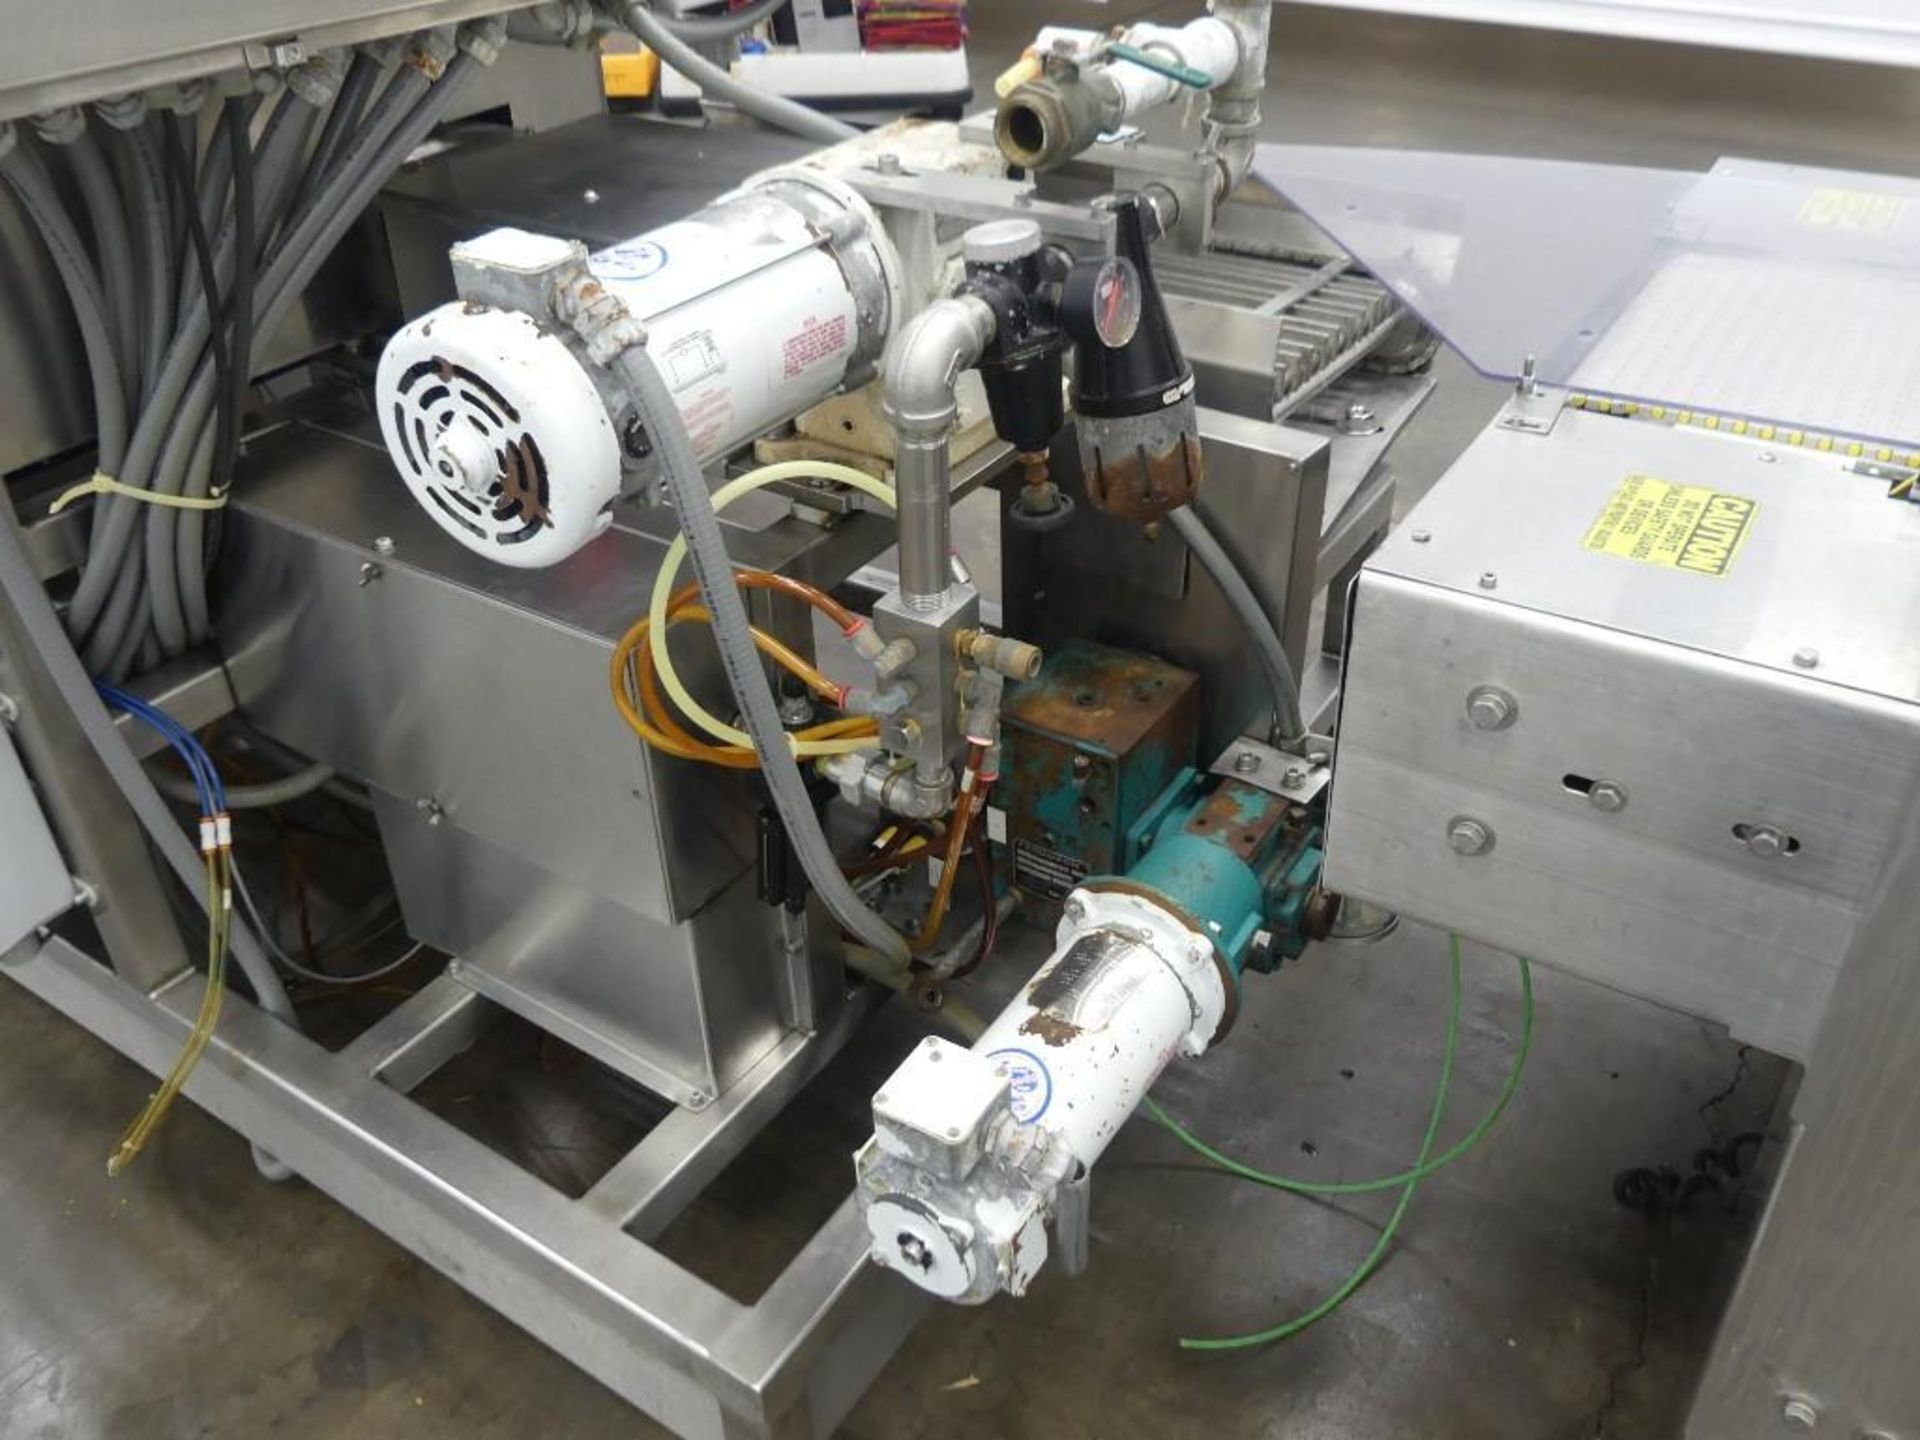 Arpac Delkor Spot-Pak 112-SS-24 Automatic Stainless Steel Shrink Bundler - Image 33 of 101